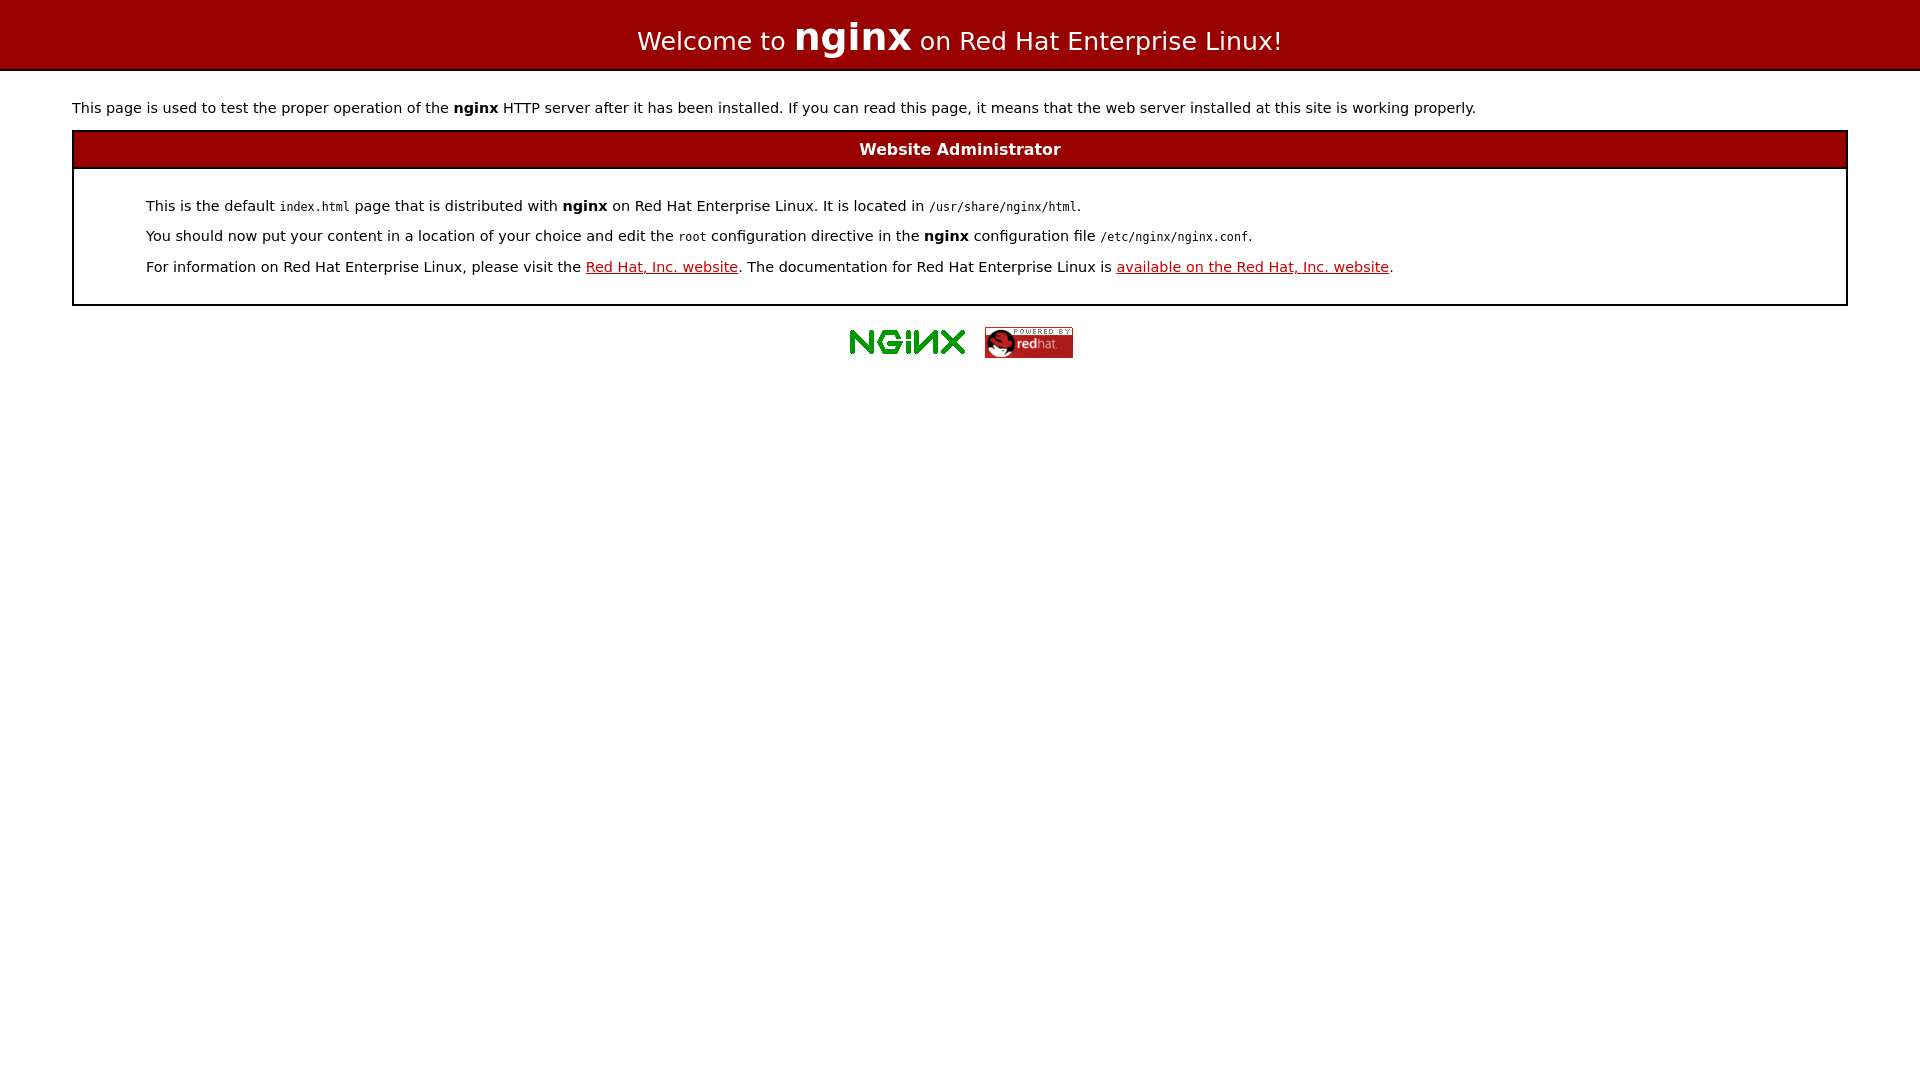 Test Page for the Nginx HTTP Server on Red Hat Enterprise Linux截图时间：2023-12-02